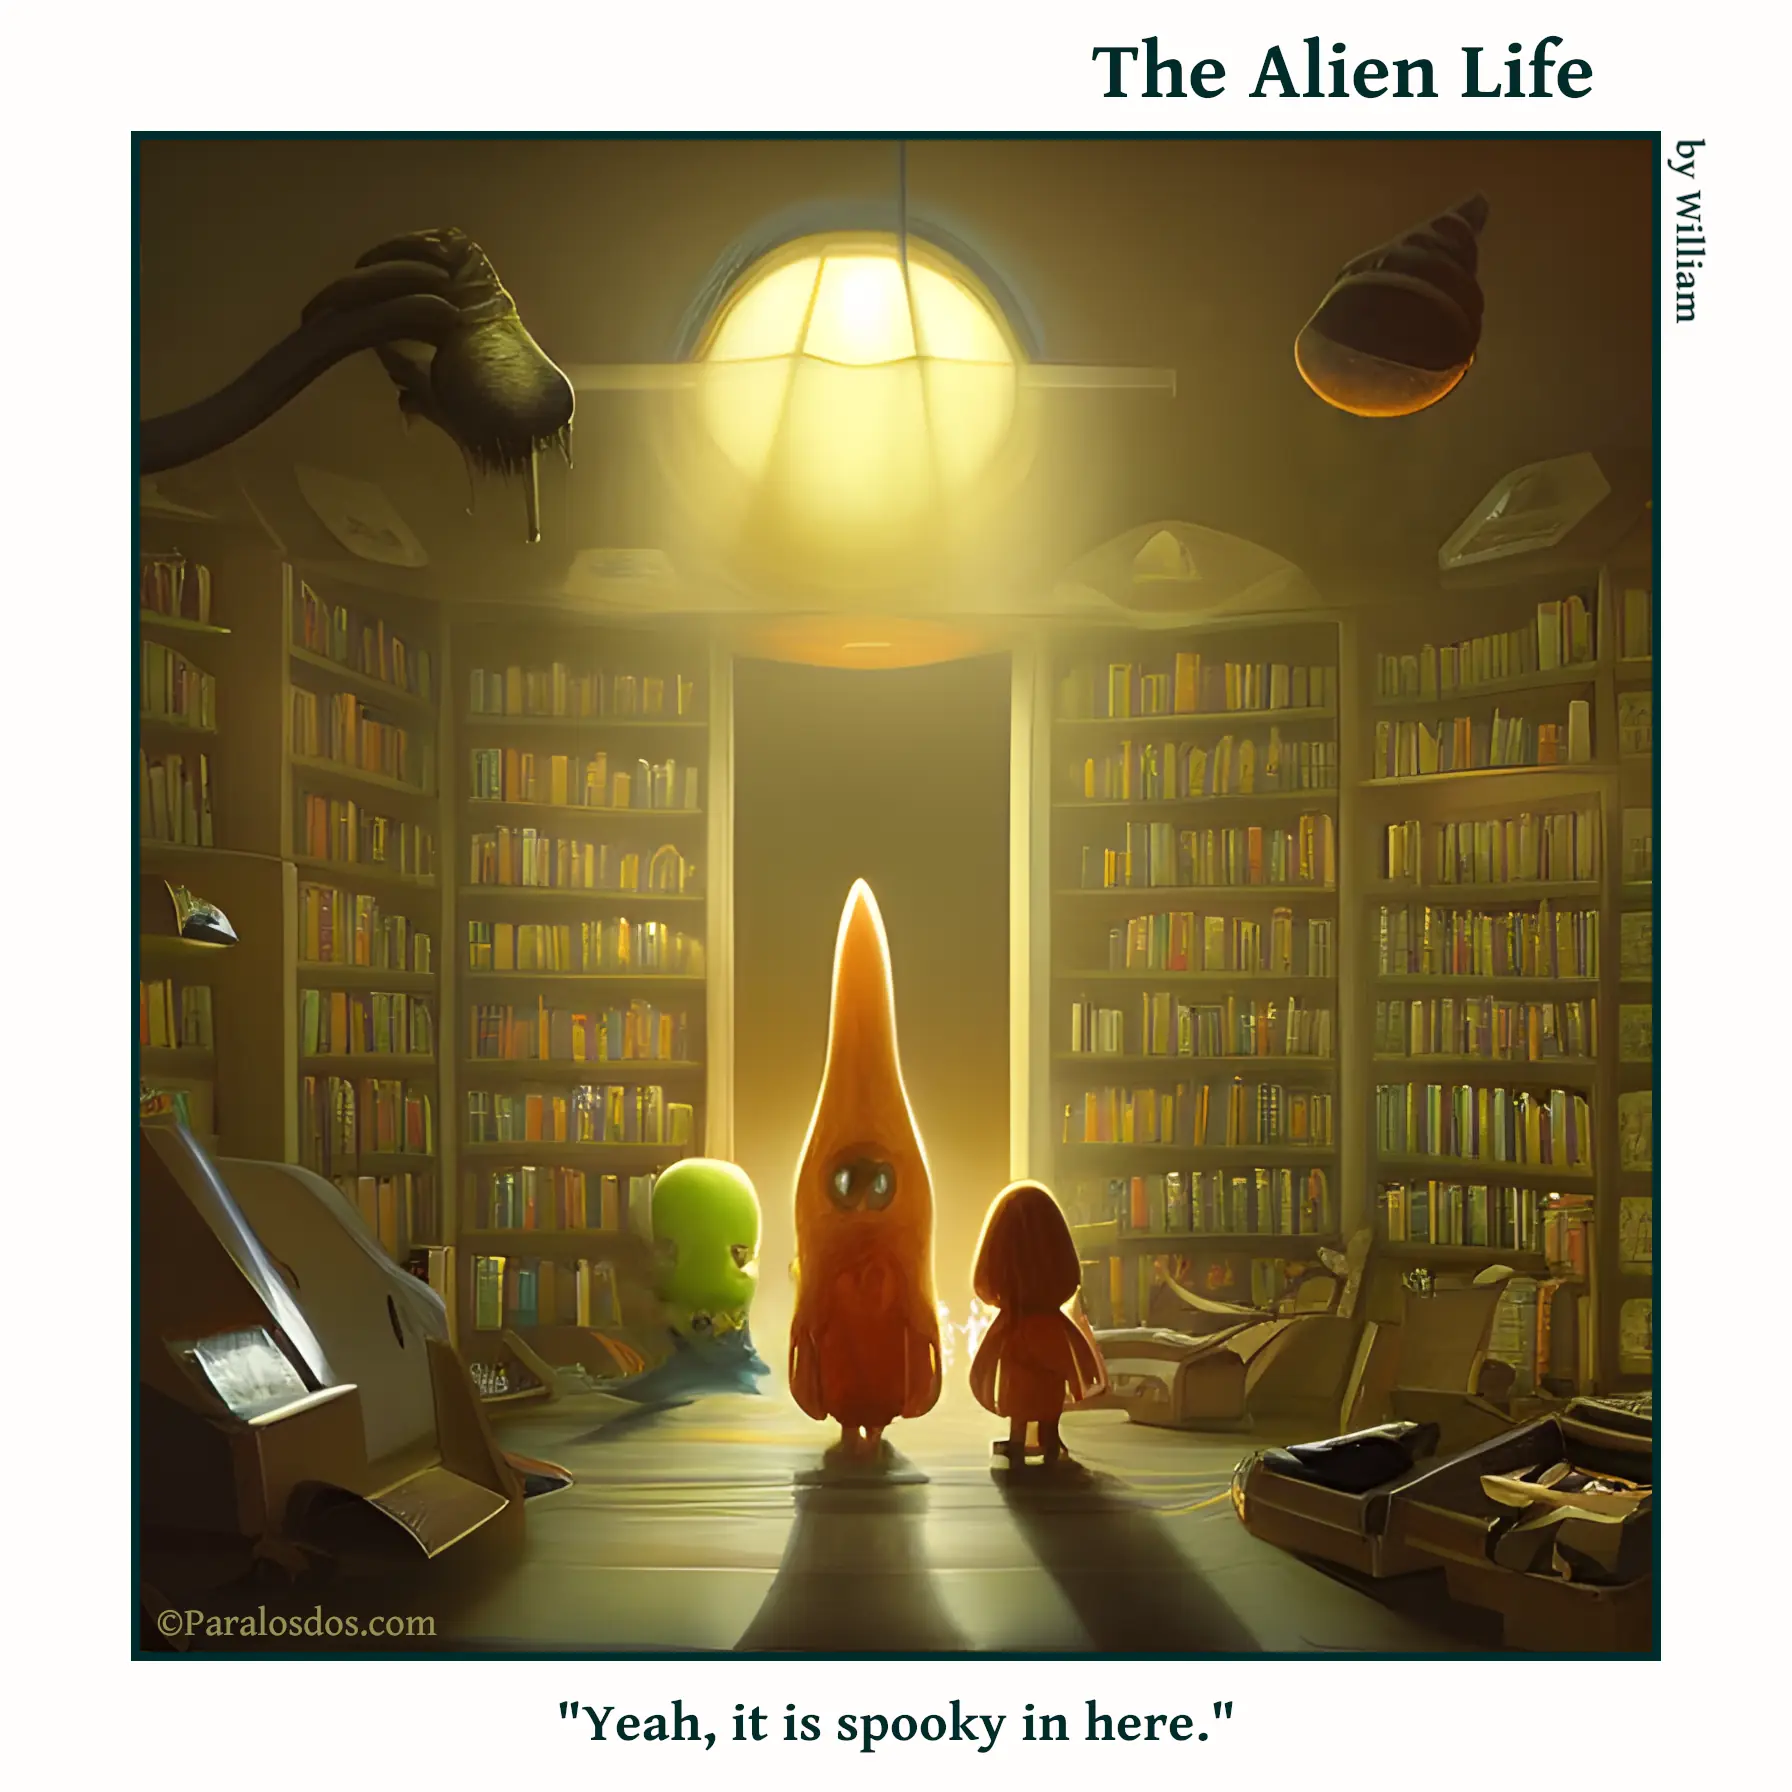 The Alien Life, one panel Comic. Three aliens are in a haunted looking library, one of them is talking. The caption reads: "Yeah, it is spooky in here."